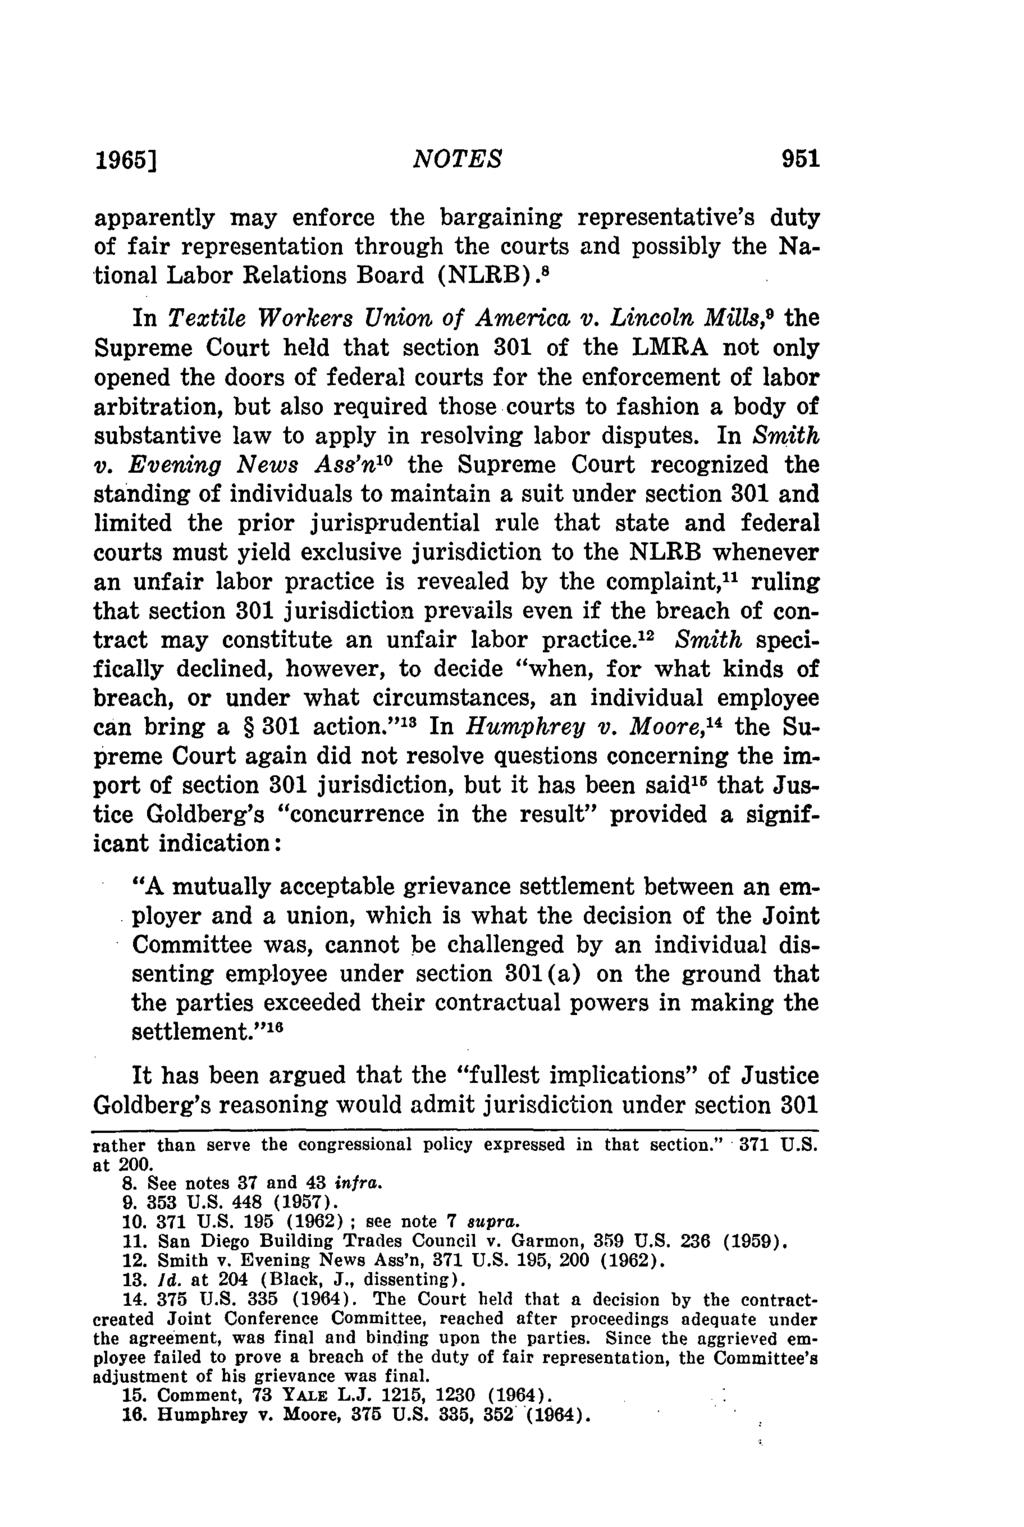 1965] NOTES apparently may enforce the bargaining representative's duty of fair representation through the courts and possibly the National Labor Relations Board (NLRB).